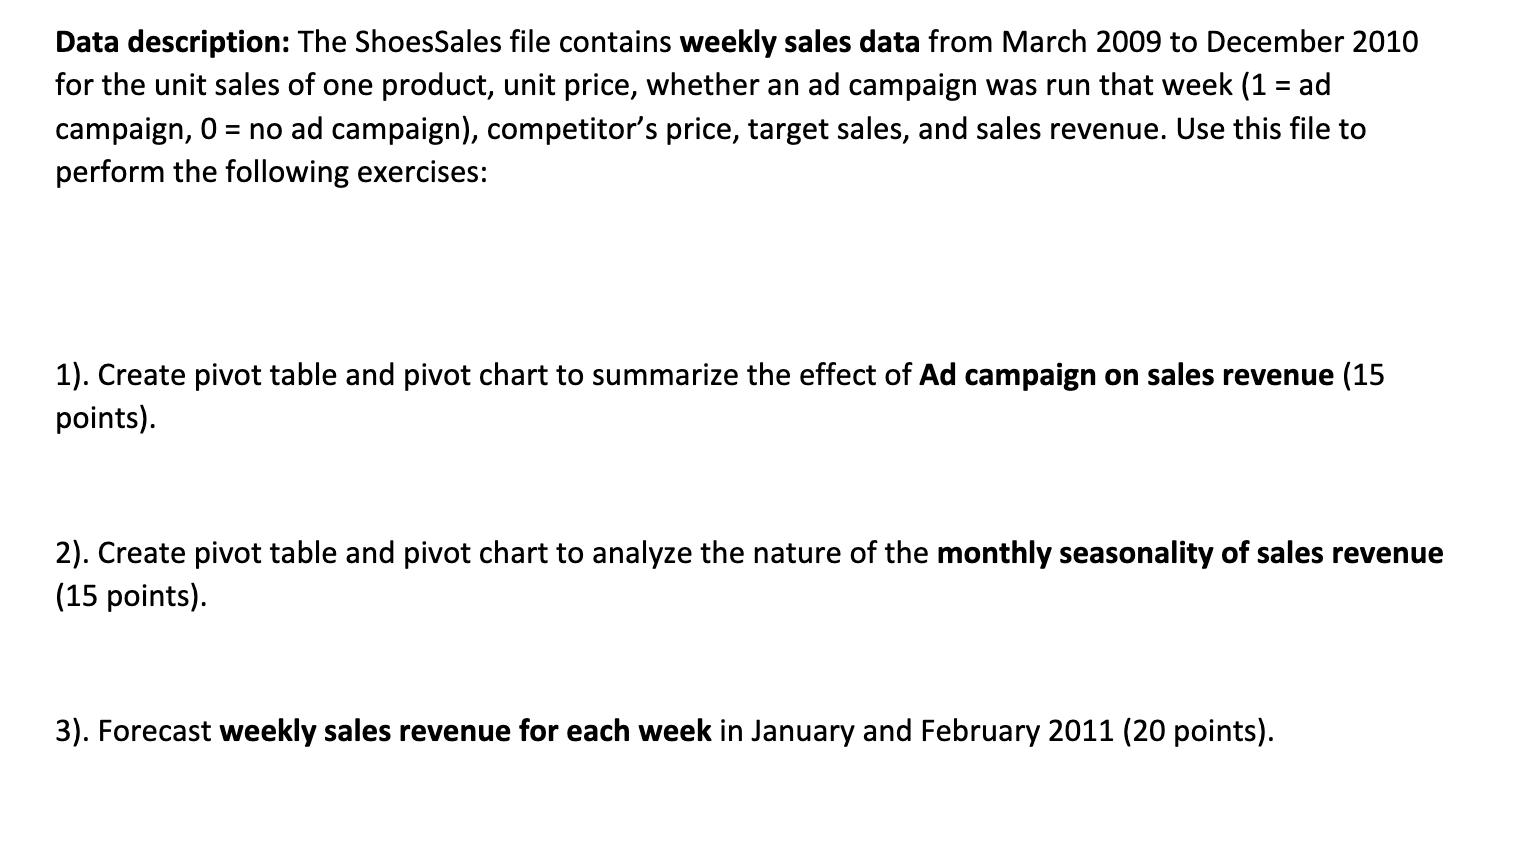 Data description: The ShoesSales file contains weekly sales data from March 2009 to December 2010 for the